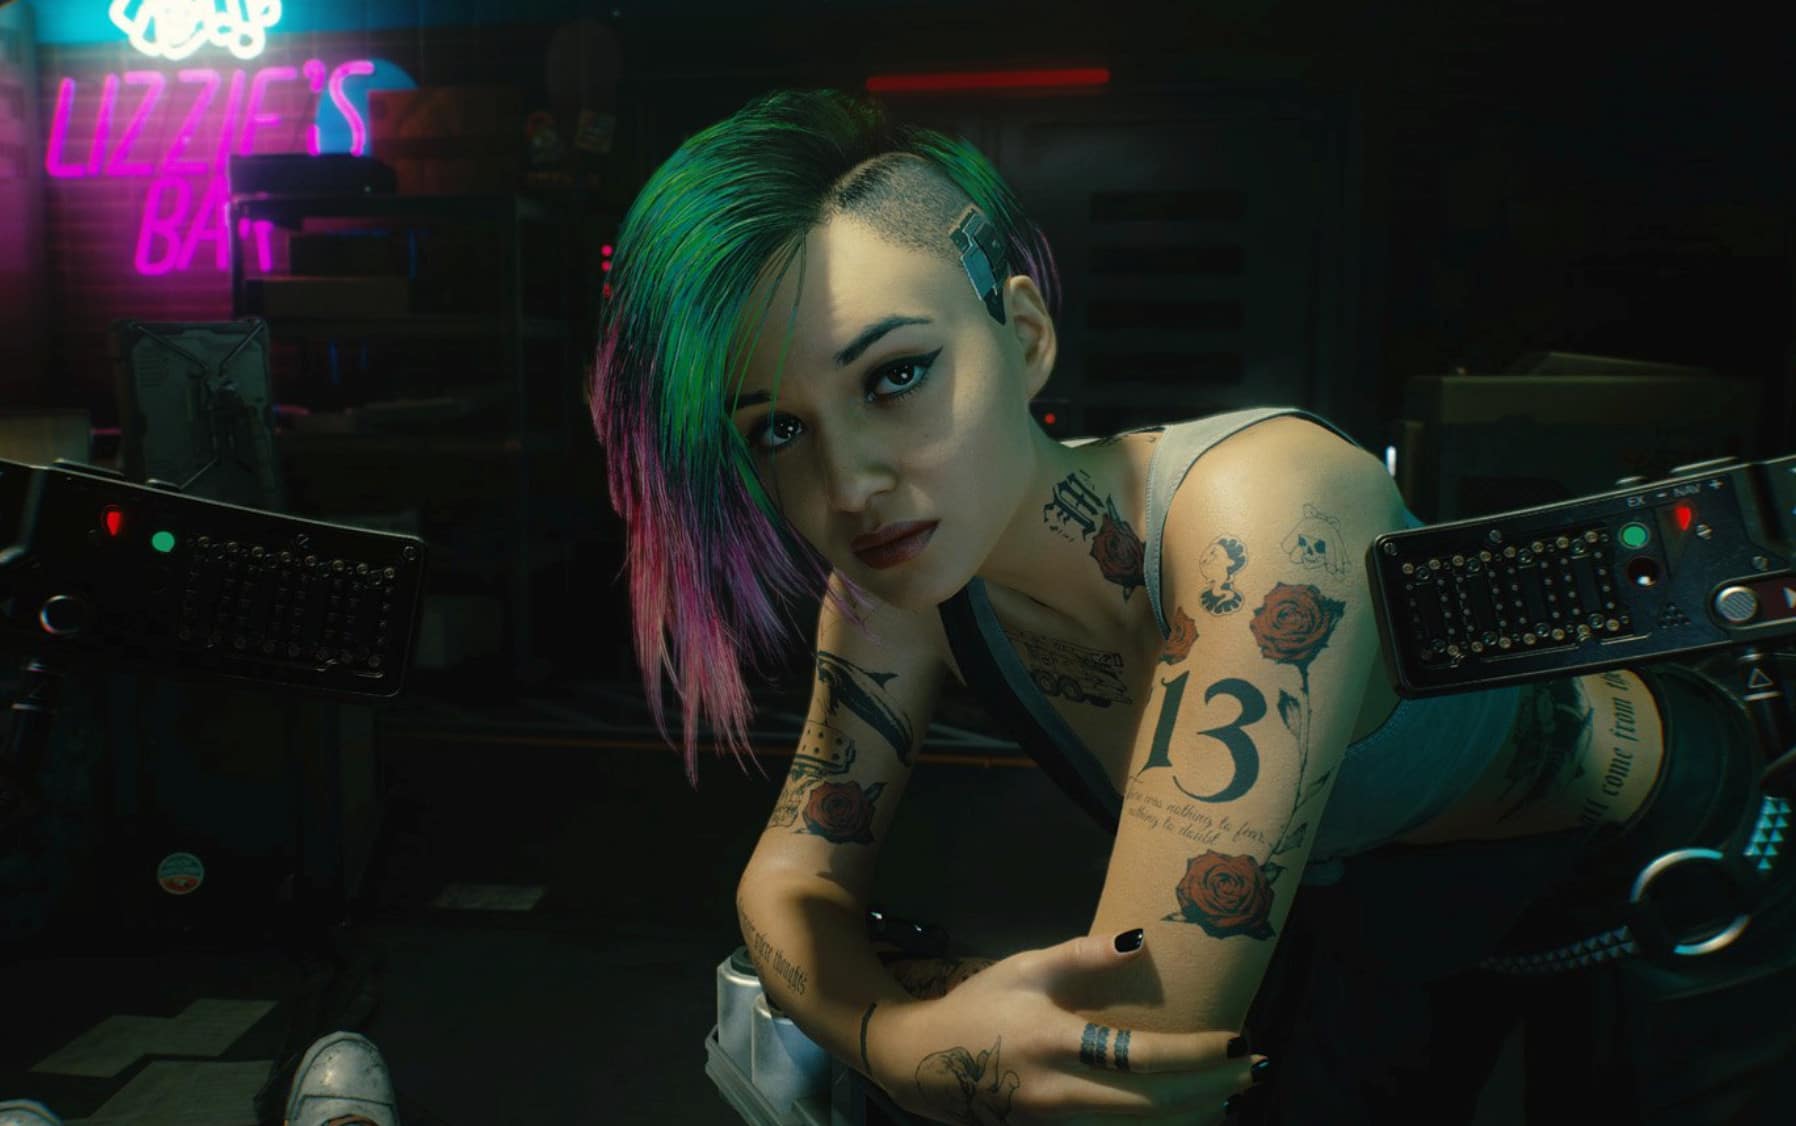 Cyberpunk 2077 PS5 & Xbox Series Upgrades Out Now with Free Trial